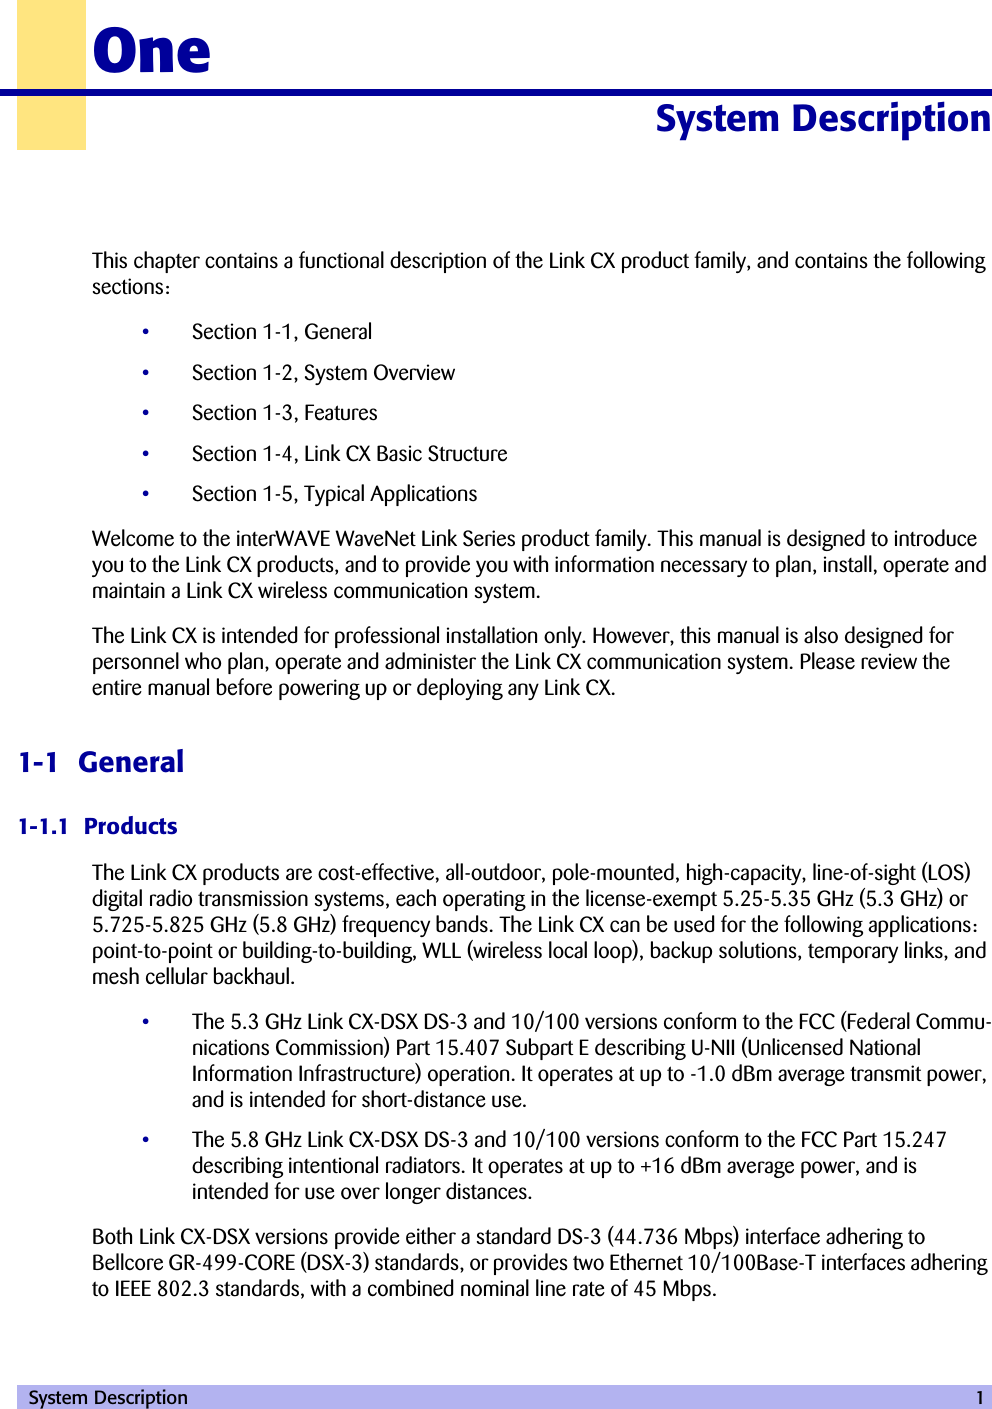  System Description 1OneSystem Description 10000This chapter contains a functional description of the Link CX product family, and contains the following sections:•Section 1-1, General•Section 1-2, System Overview•Section 1-3, Features•Section 1-4, Link CX Basic Structure•Section 1-5, Typical ApplicationsWelcome to the interWAVE WaveNet Link Series product family. This manual is designed to introduce you to the Link CX products, and to provide you with information necessary to plan, install, operate and maintain a Link CX wireless communication system.The Link CX is intended for professional installation only. However, this manual is also designed for personnel who plan, operate and administer the Link CX communication system. Please review the entire manual before powering up or deploying any Link CX.1-1  General1-1.1  ProductsThe Link CX products are cost-effective, all-outdoor, pole-mounted, high-capacity, line-of-sight (LOS) digital radio transmission systems, each operating in the license-exempt 5.25-5.35 GHz (5.3 GHz) or 5.725-5.825 GHz (5.8 GHz) frequency bands. The Link CX can be used for the following applications: point-to-point or building-to-building, WLL (wireless local loop), backup solutions, temporary links, and mesh cellular backhaul.•The 5.3 GHz Link CX-DSX DS-3 and 10/100 versions conform to the FCC (Federal Commu-nications Commission) Part 15.407 Subpart E describing U-NII (Unlicensed National Information Infrastructure) operation. It operates at up to -1.0 dBm average transmit power, and is intended for short-distance use. •The 5.8 GHz Link CX-DSX DS-3 and 10/100 versions conform to the FCC Part 15.247 describing intentional radiators. It operates at up to +16 dBm average power, and is intended for use over longer distances. Both Link CX-DSX versions provide either a standard DS-3 (44.736 Mbps) interface adhering to Bellcore GR-499-CORE (DSX-3) standards, or provides two Ethernet 10/100Base-T interfaces adhering to IEEE 802.3 standards, with a combined nominal line rate of 45 Mbps.